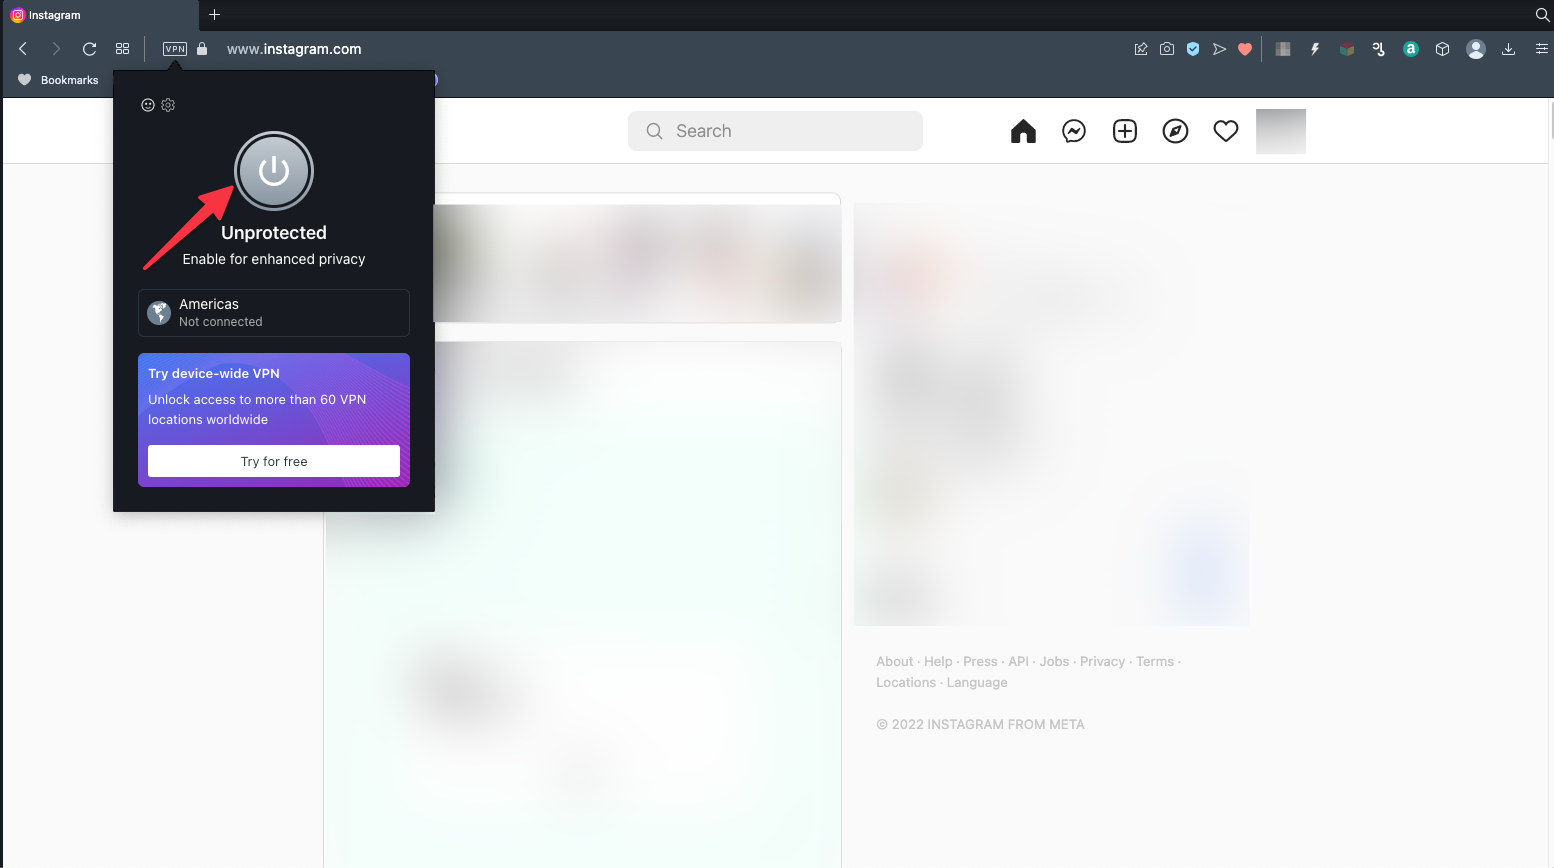 Remote.tools shows how to use Instagram via VPN on opera for macOS